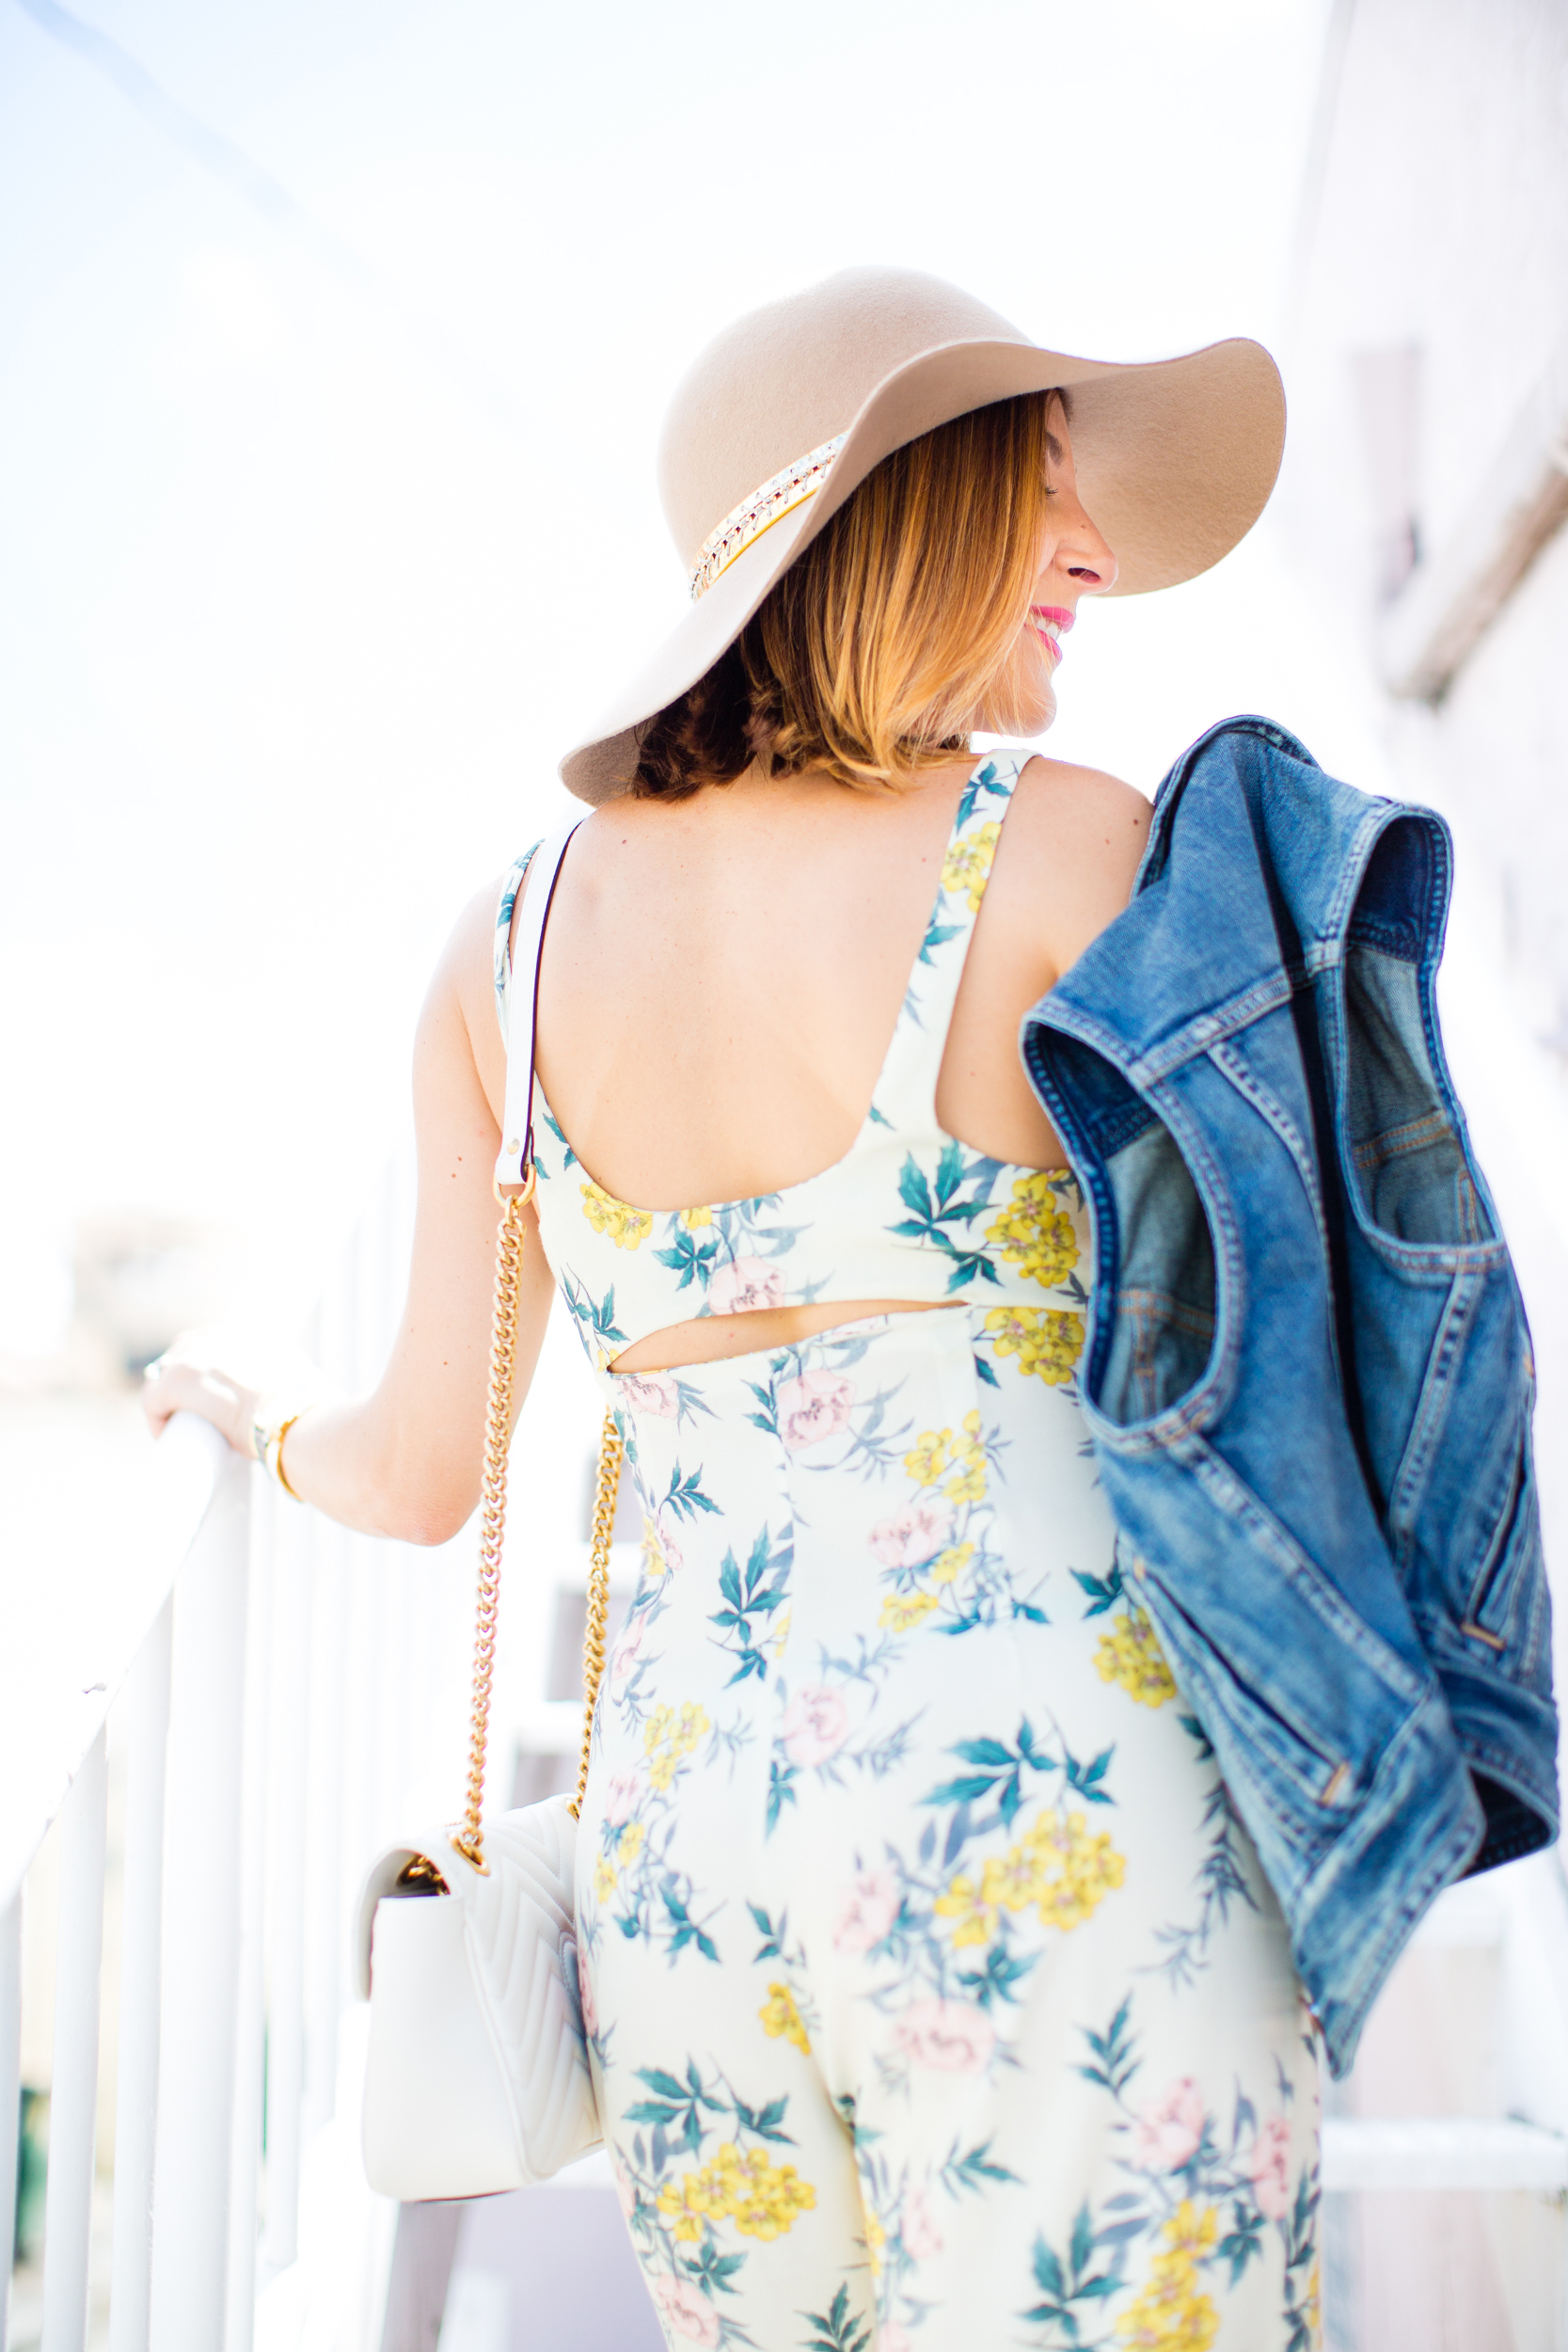 Blame-it-on-Mei-Miami-Fashion-Blogger-2016-Floral-Jumpsuit-Sleeveless-Denim-Vest-Floppy-Hat-Festival-Inspo-Summer-Look-Casual-Look-Gucci-Soho-Summer-Outft-Casual-Look-Gucci-Marmont-Matelasse